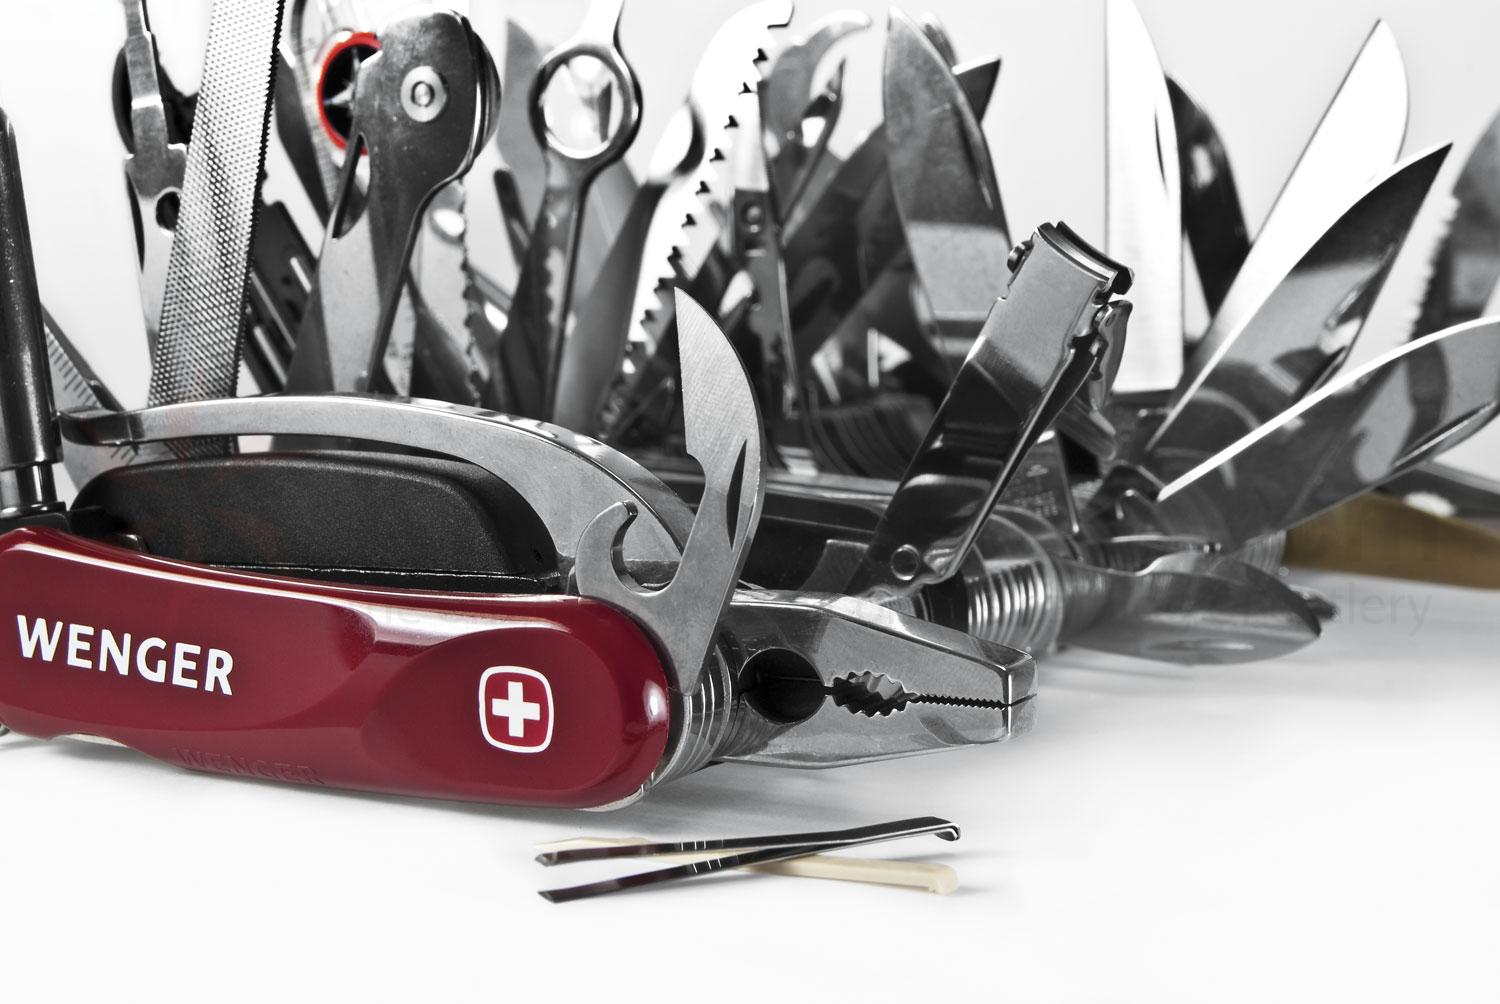 Wenger 16999 Swiss Army Knife Giant. 